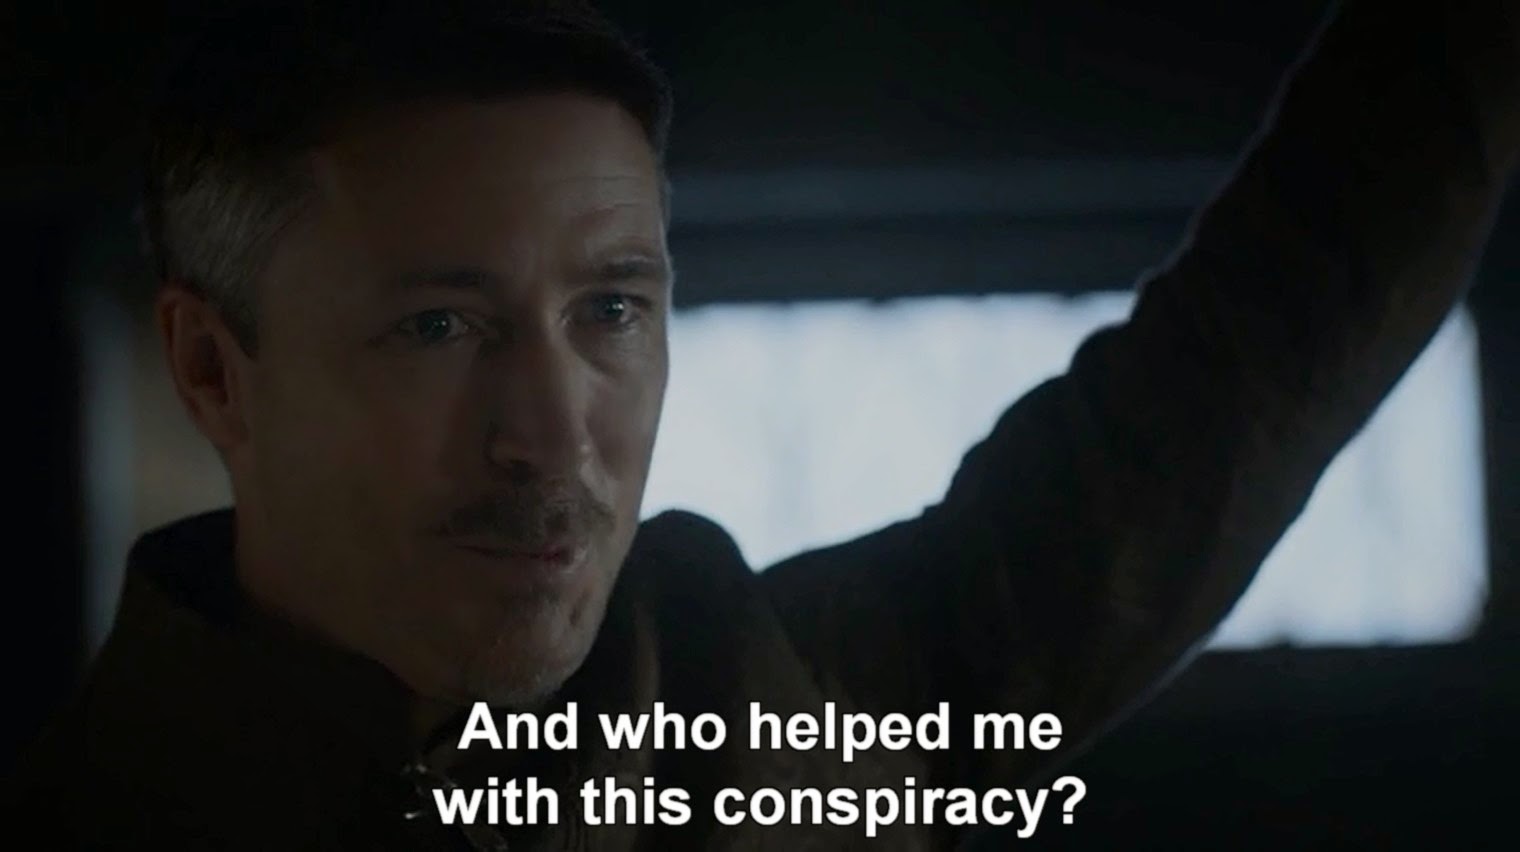 HBO Game of Thrones s04e04: Petyr Baelish and his conspiracy